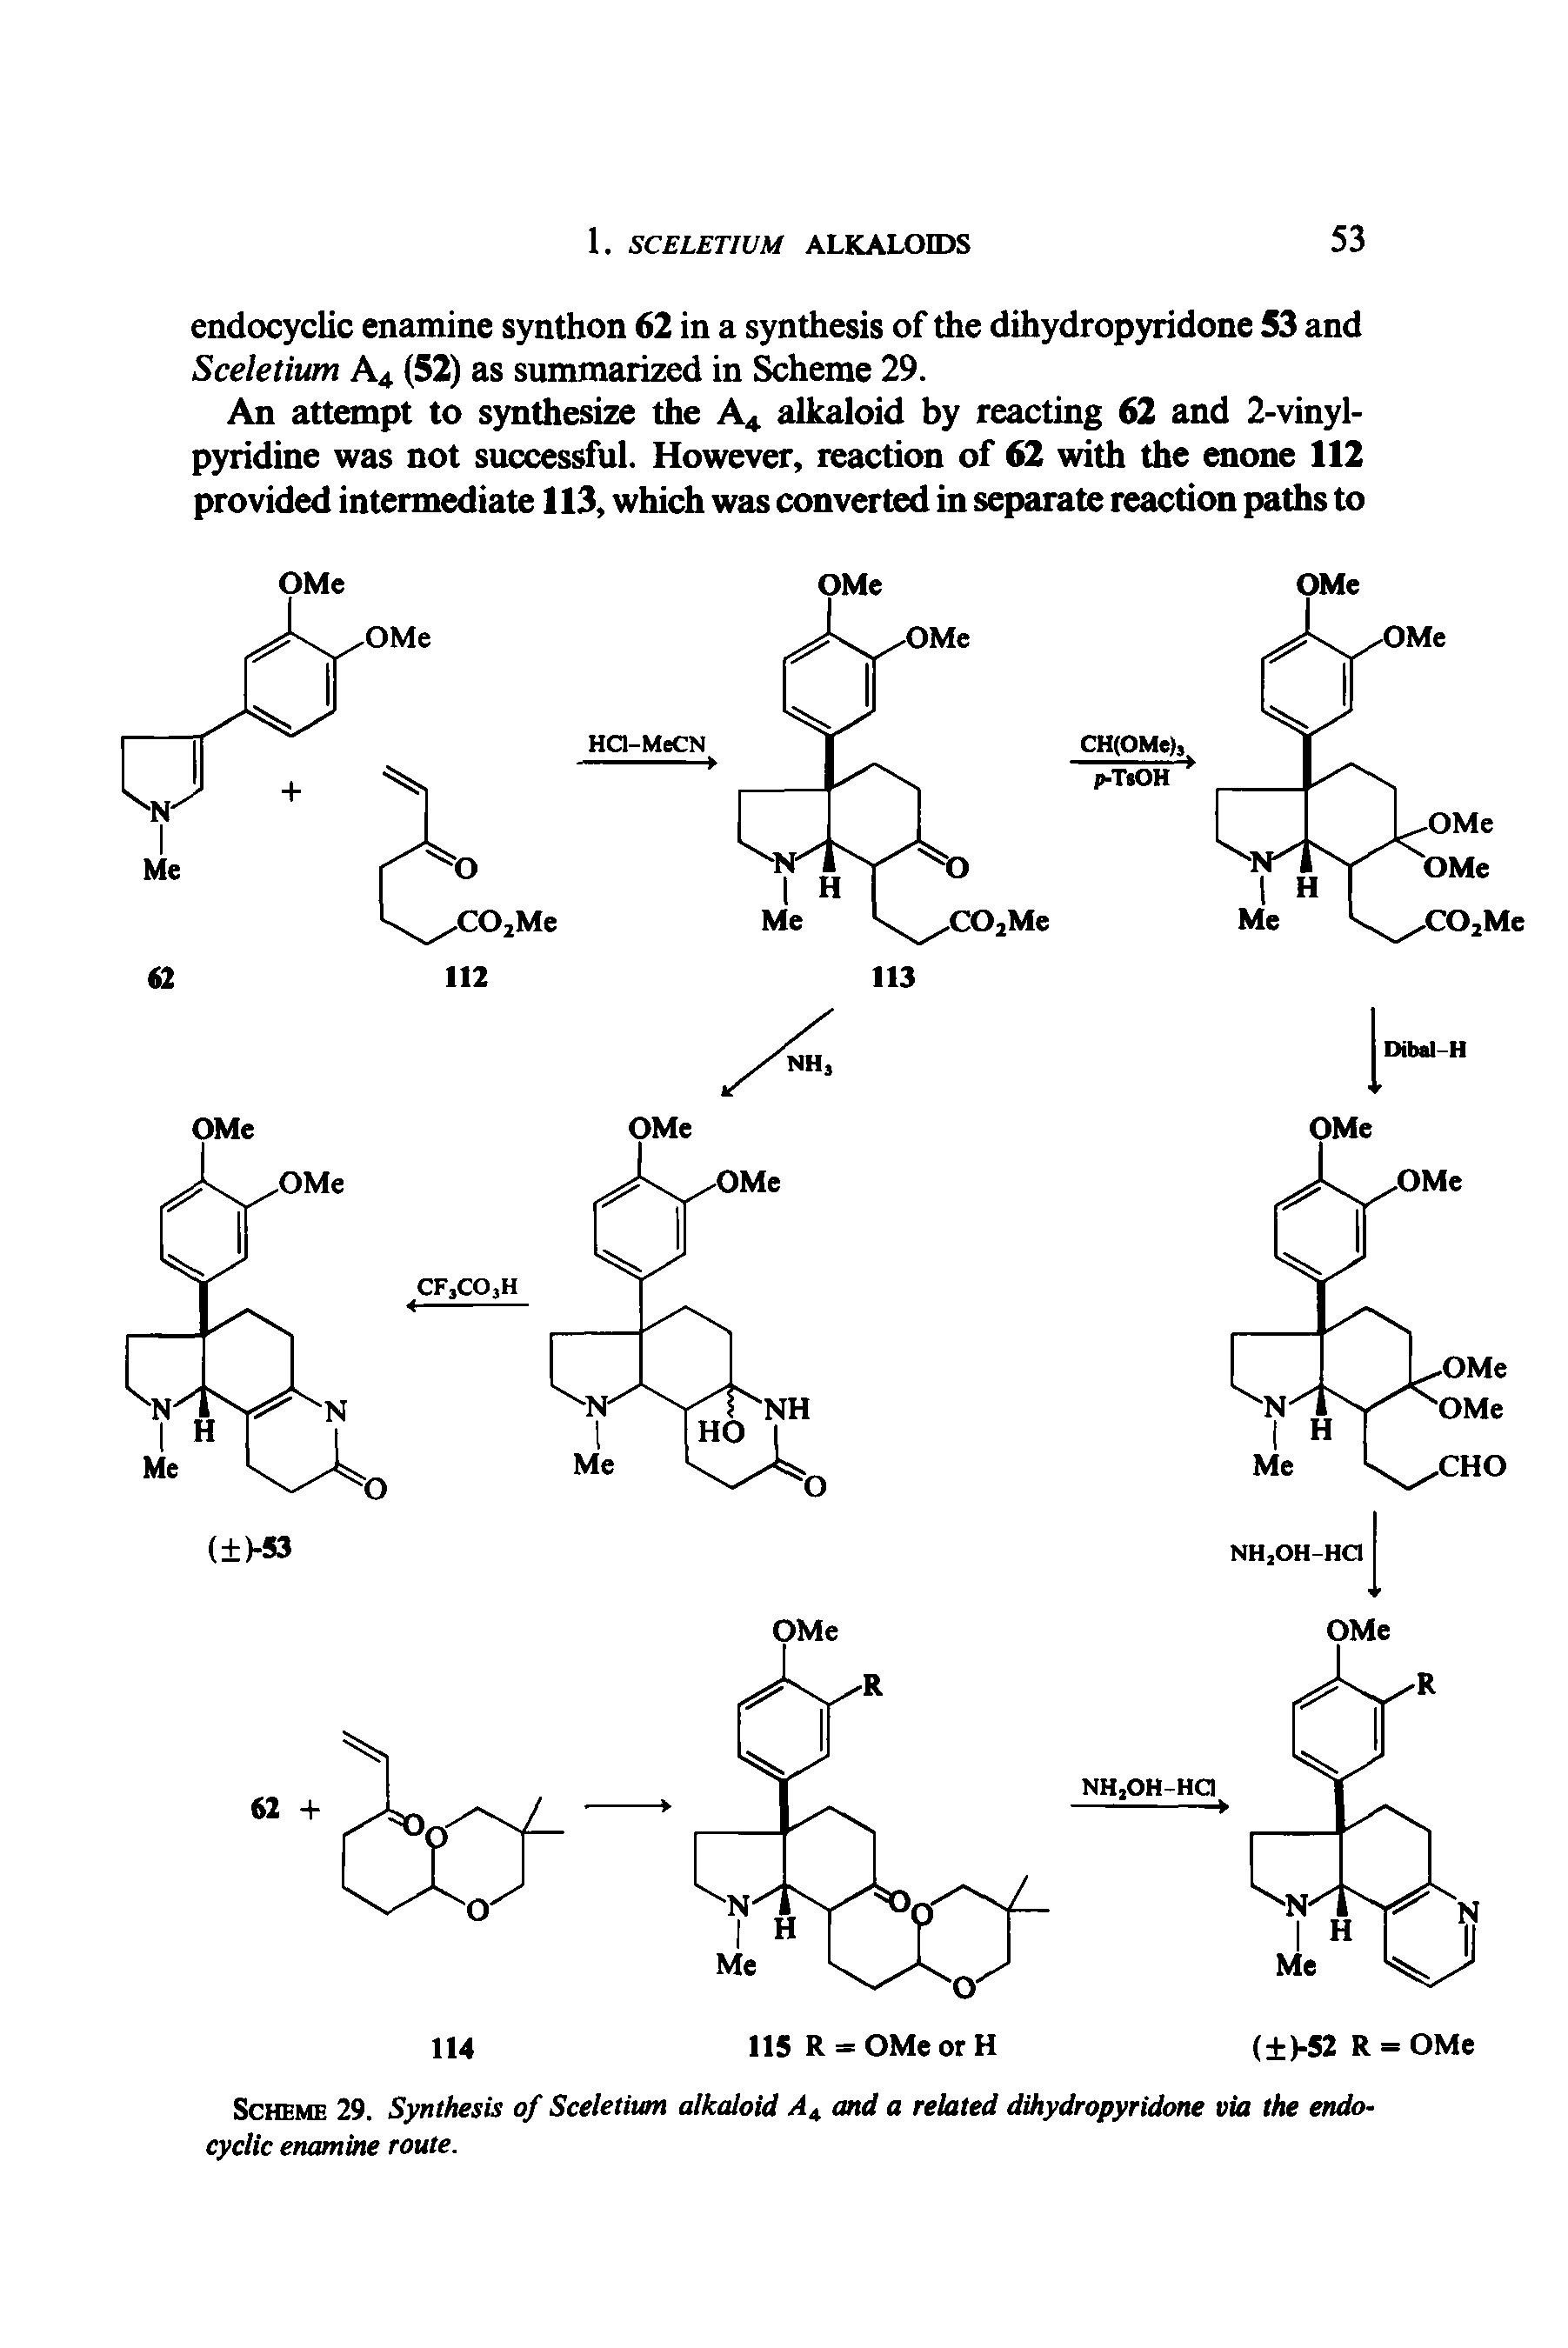 Scheme 29. Synthesis of Sceletium alkaloid and a related dihydropyridtme via the endocyclic enamine route.